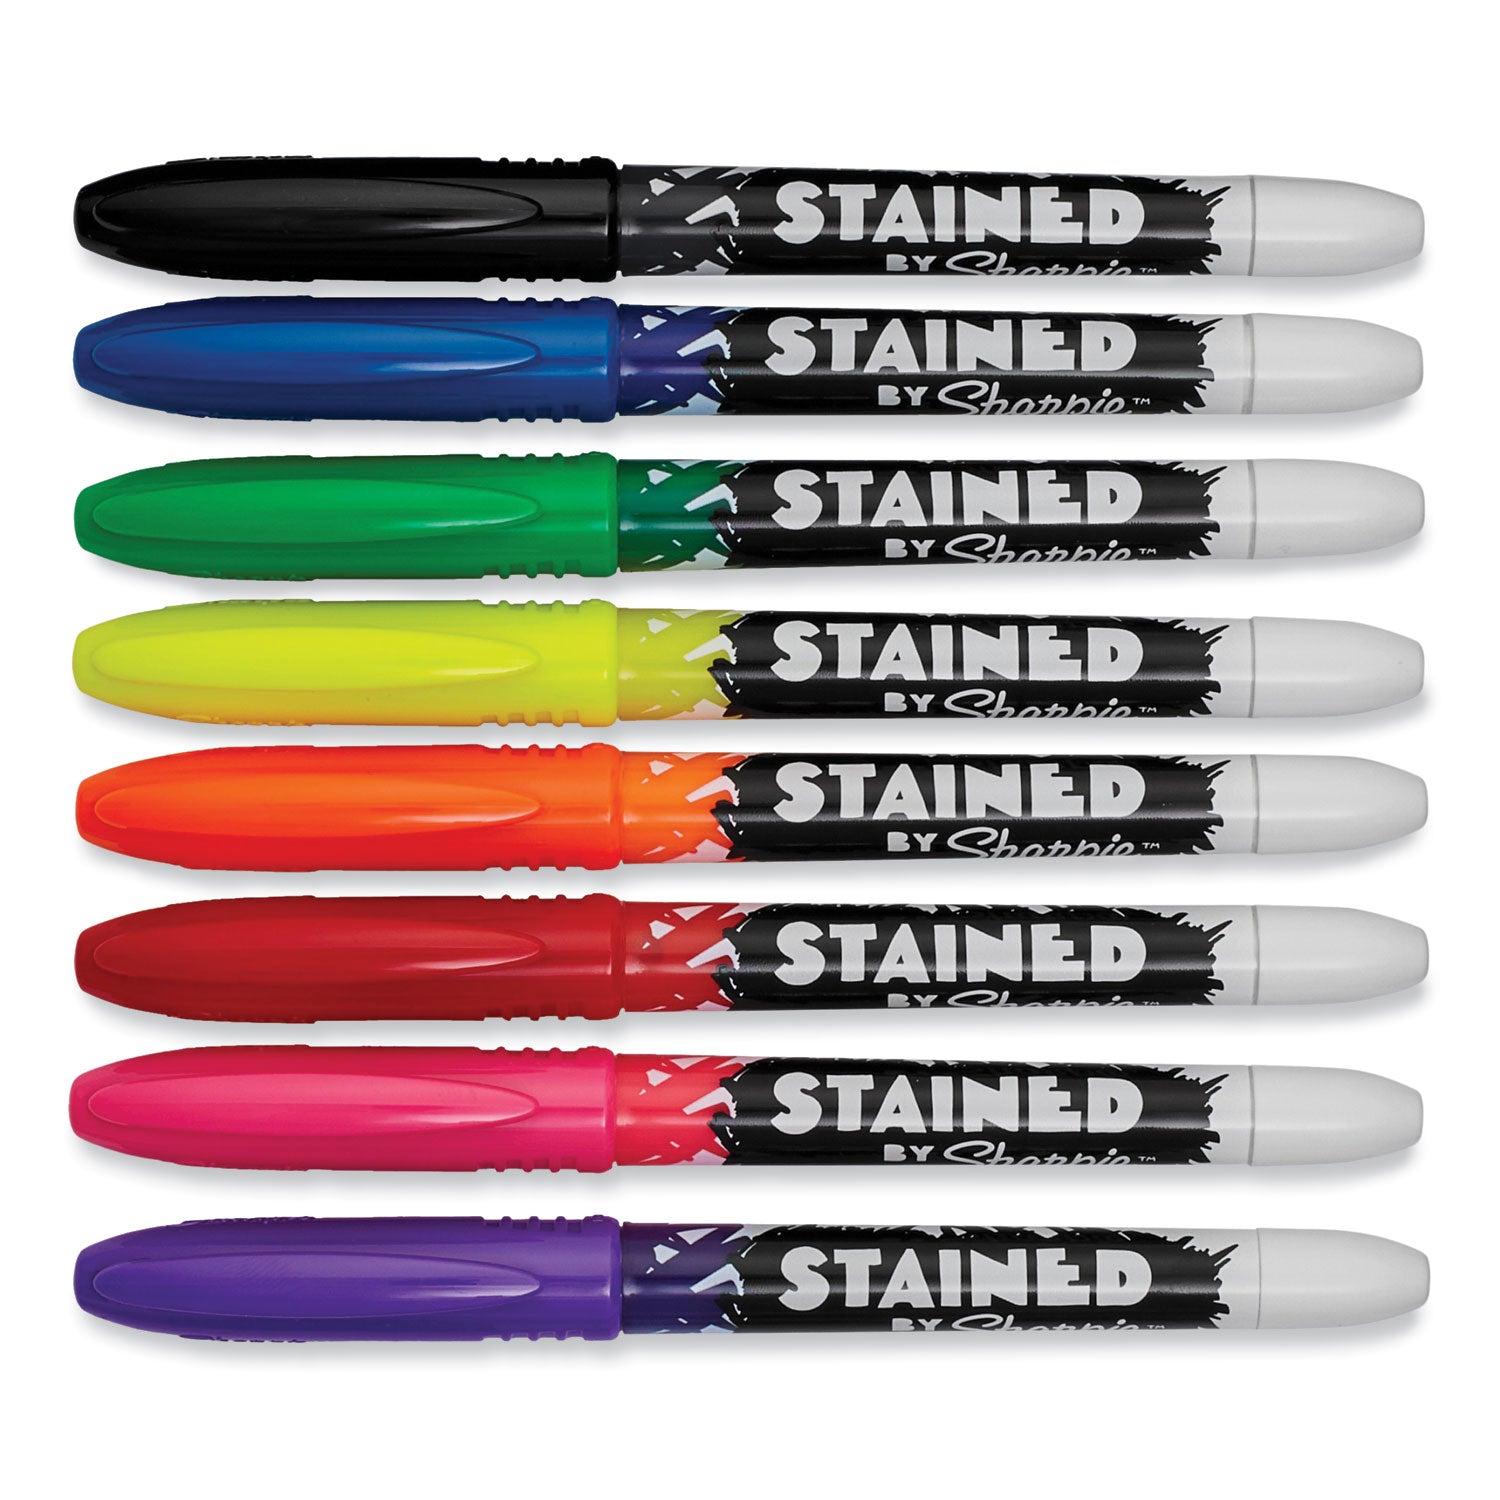 Stained Fabric Markers, Medium Brush Tip, Assorted Colors, 8/Pack - 